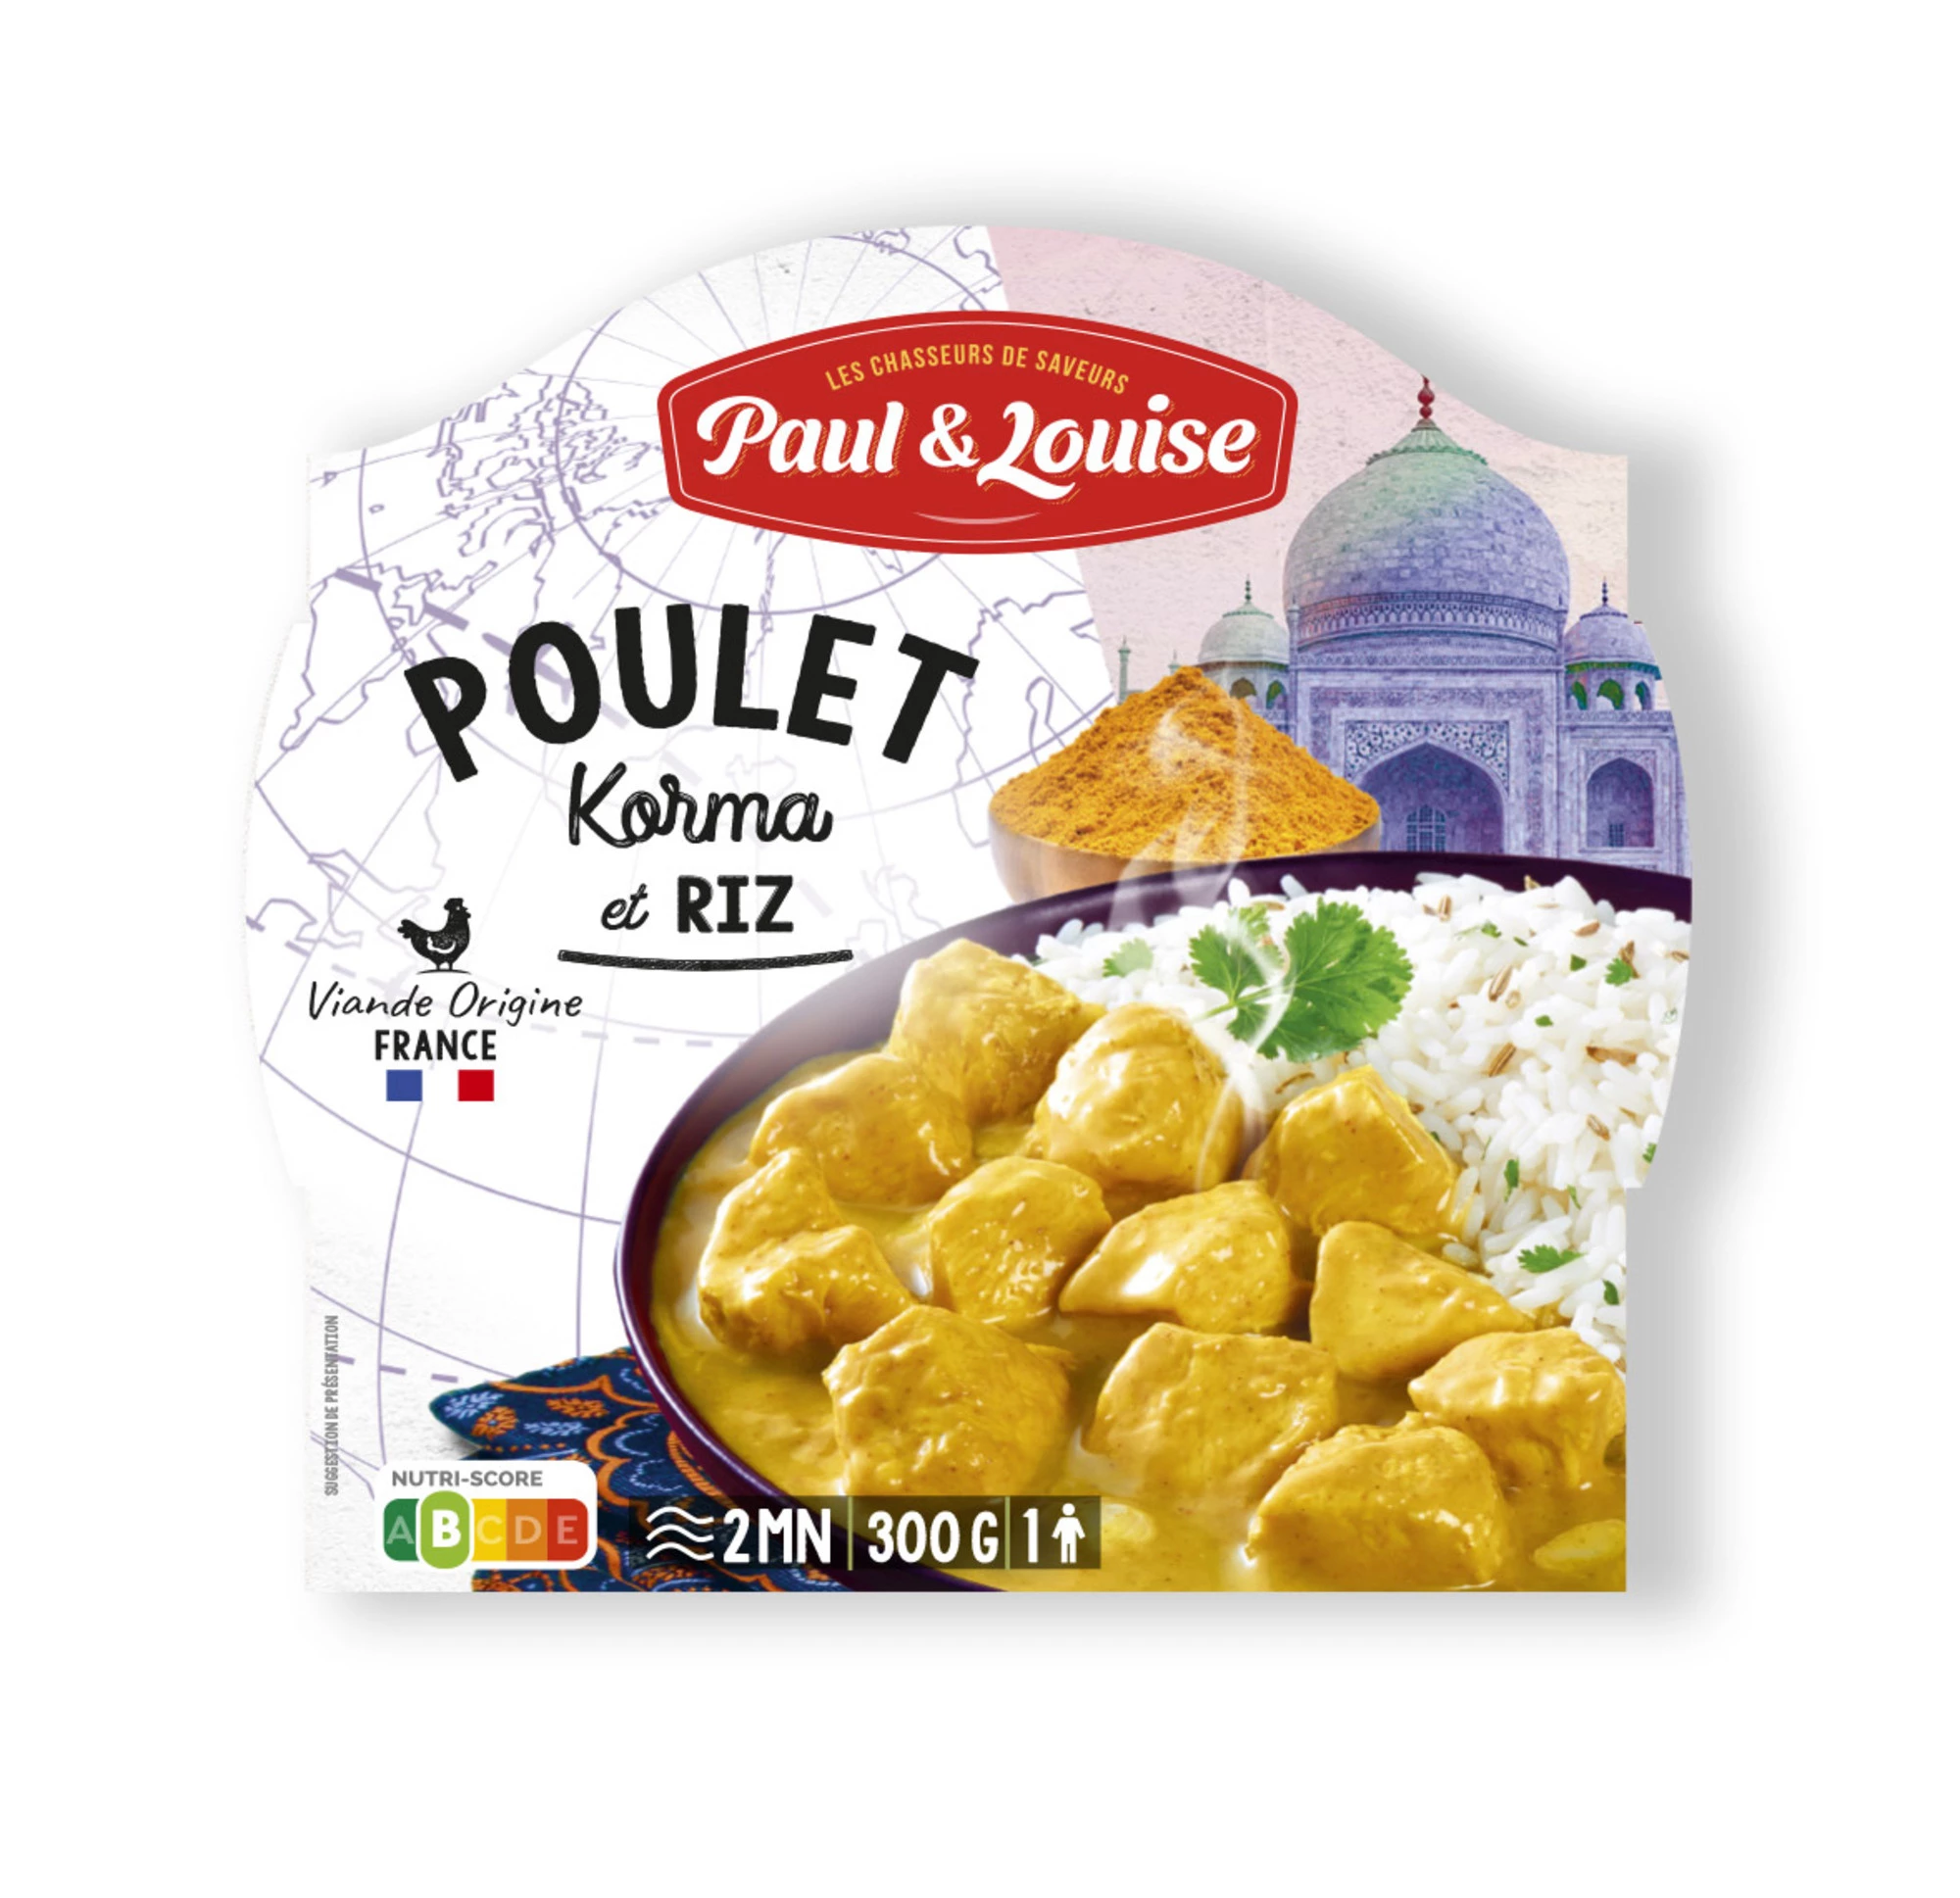 Chicken Korma and Rice, 300g - PAUL & LOUISE